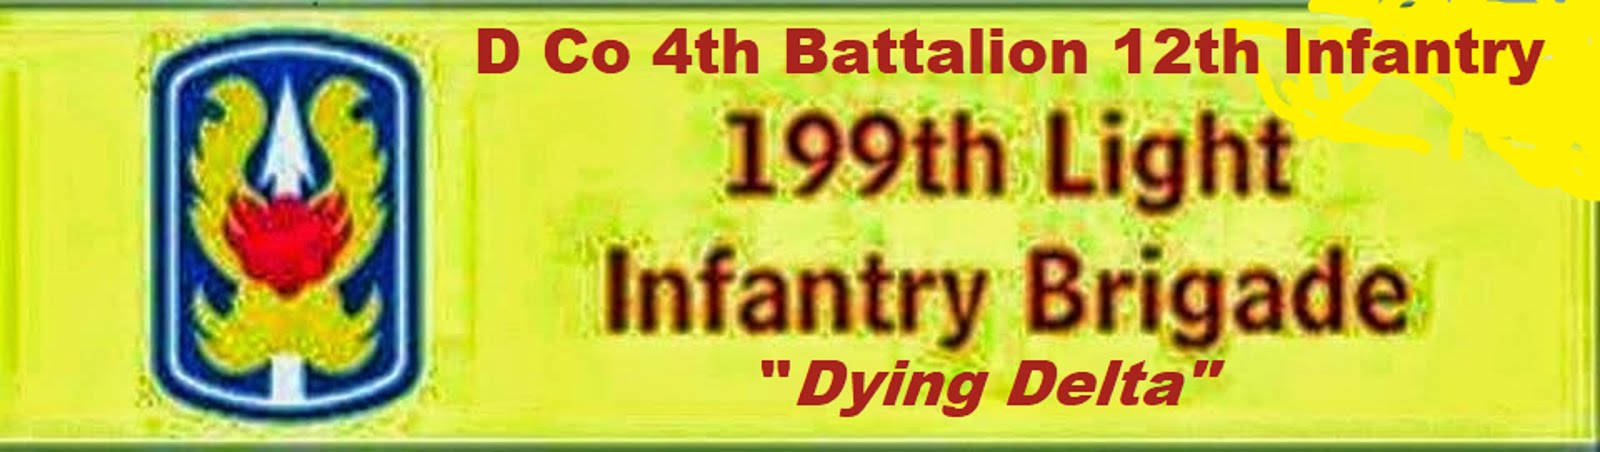 D CO   4th BATTALION 12th INFANTRY 199tth LIGHT INFANTRY BRIGADE "DYING DELTA"